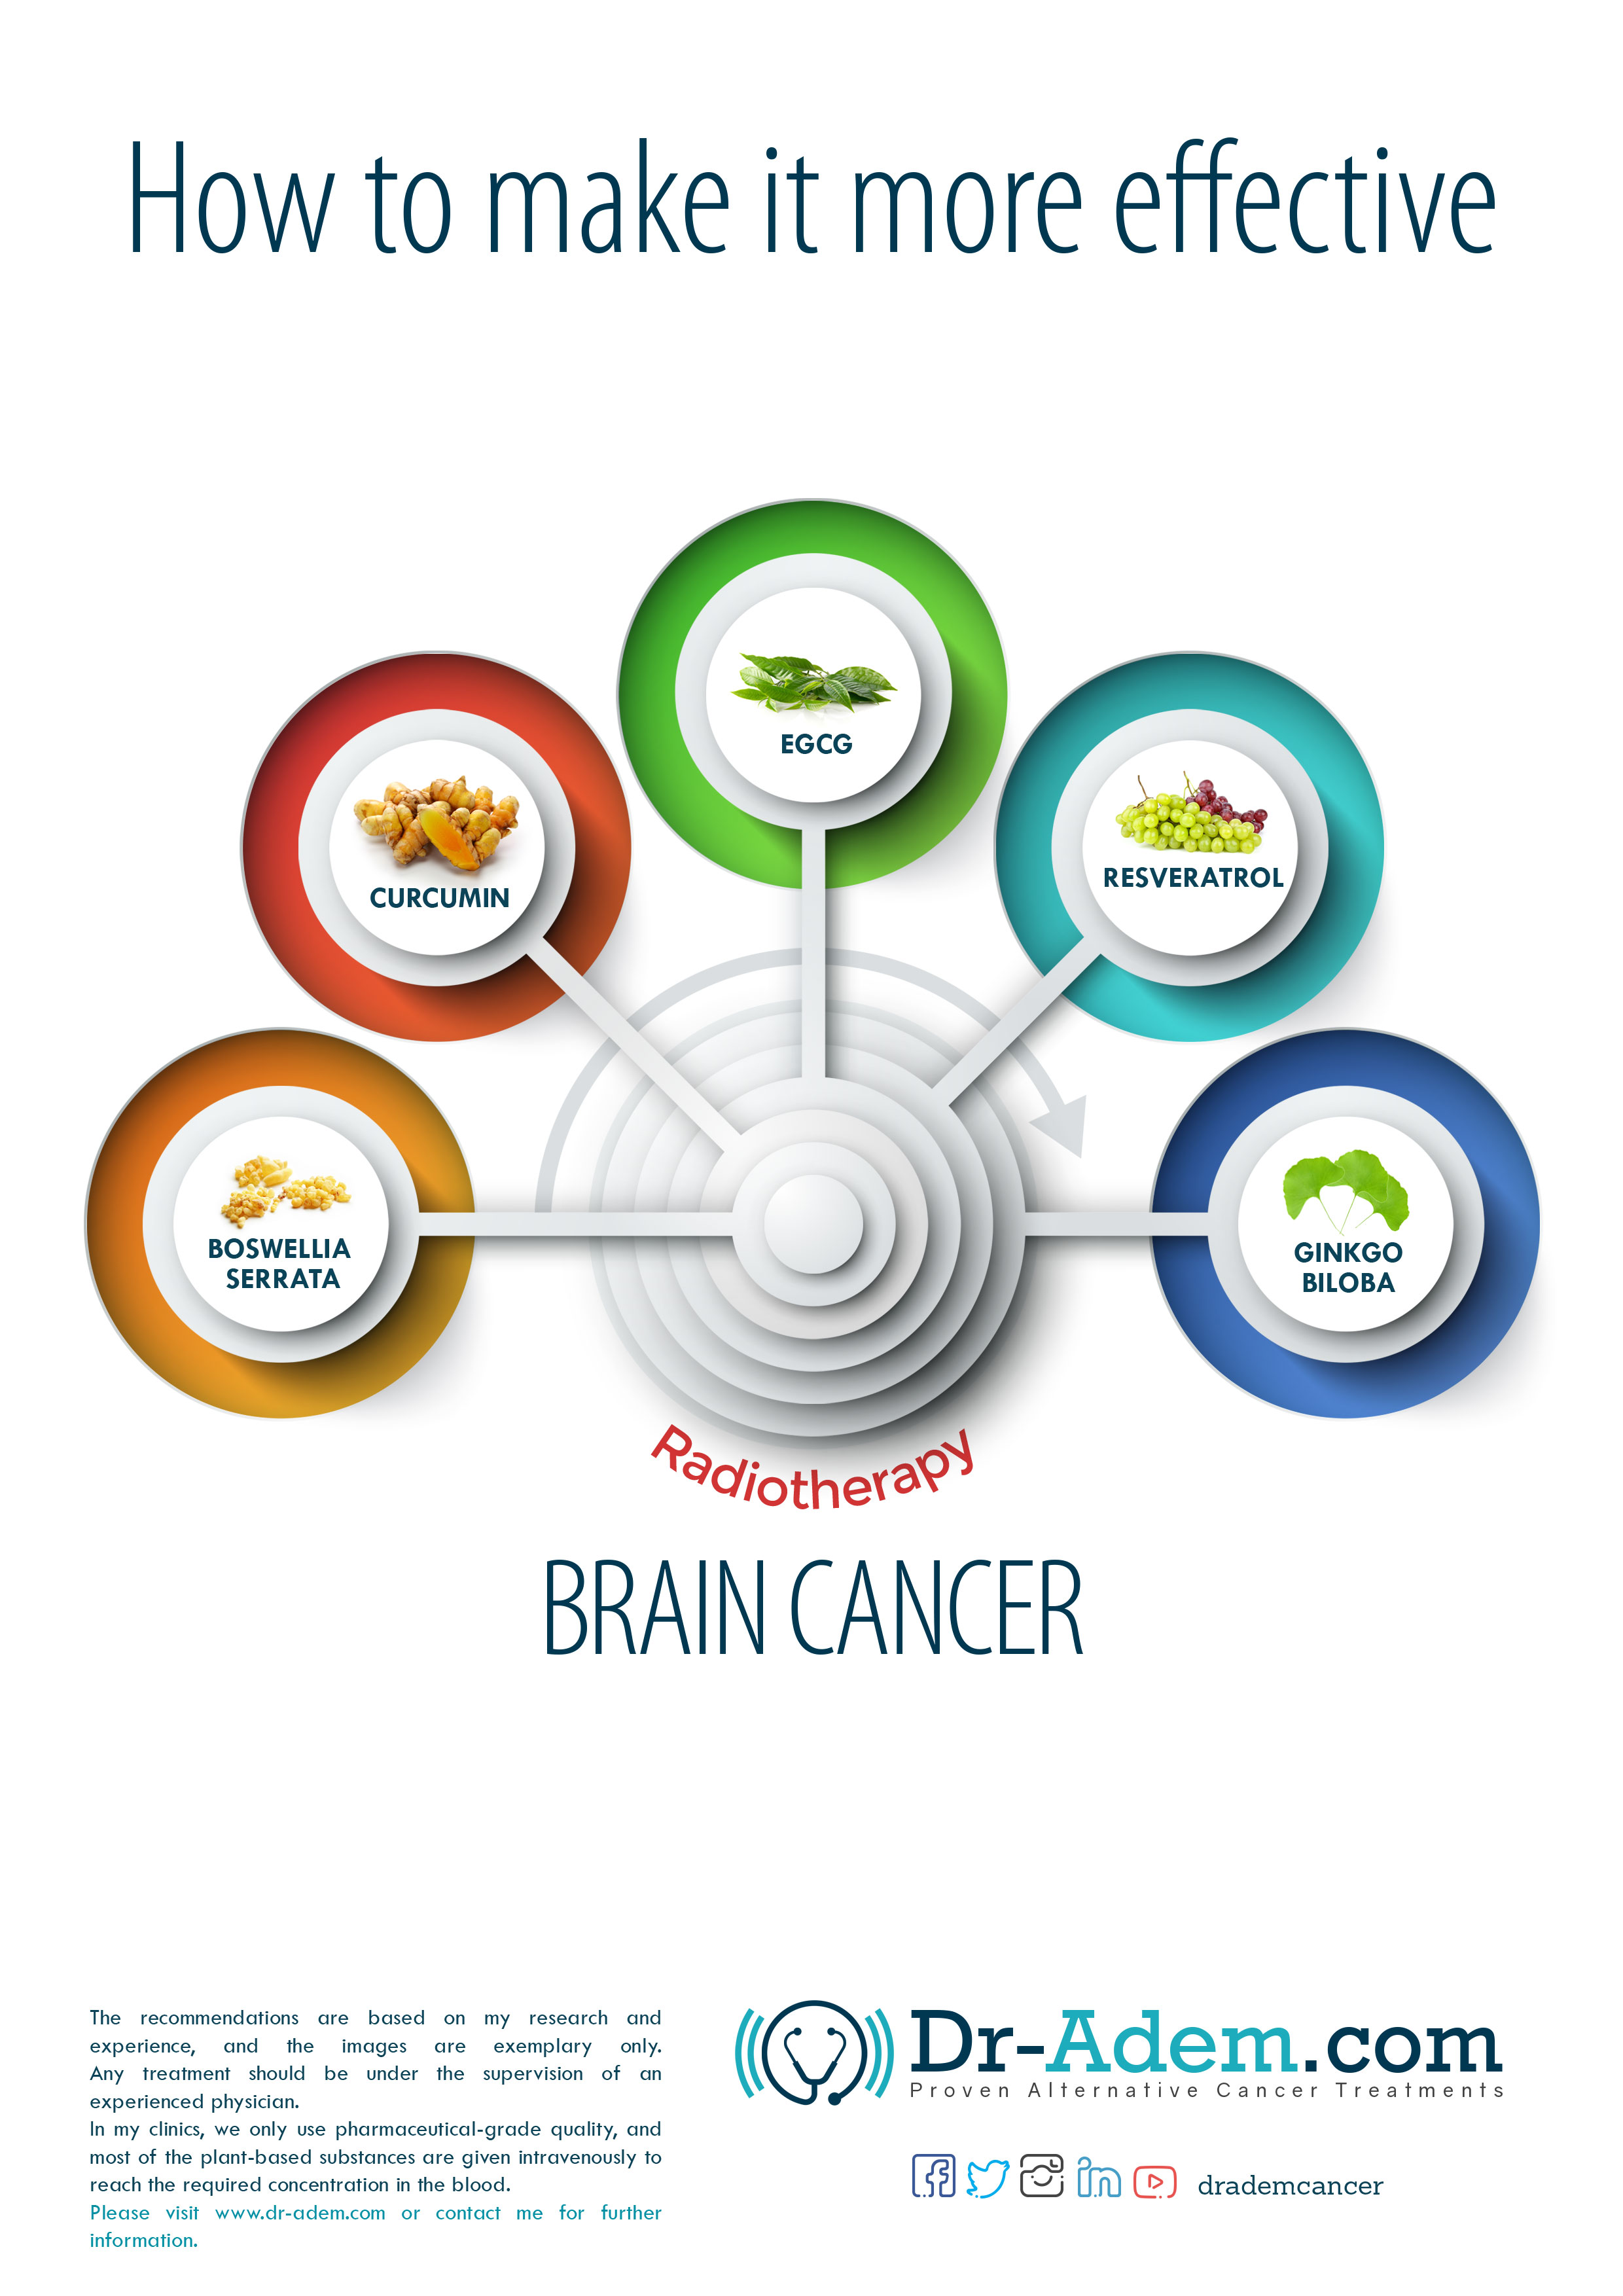 Radiotherapy For Brain Cancer